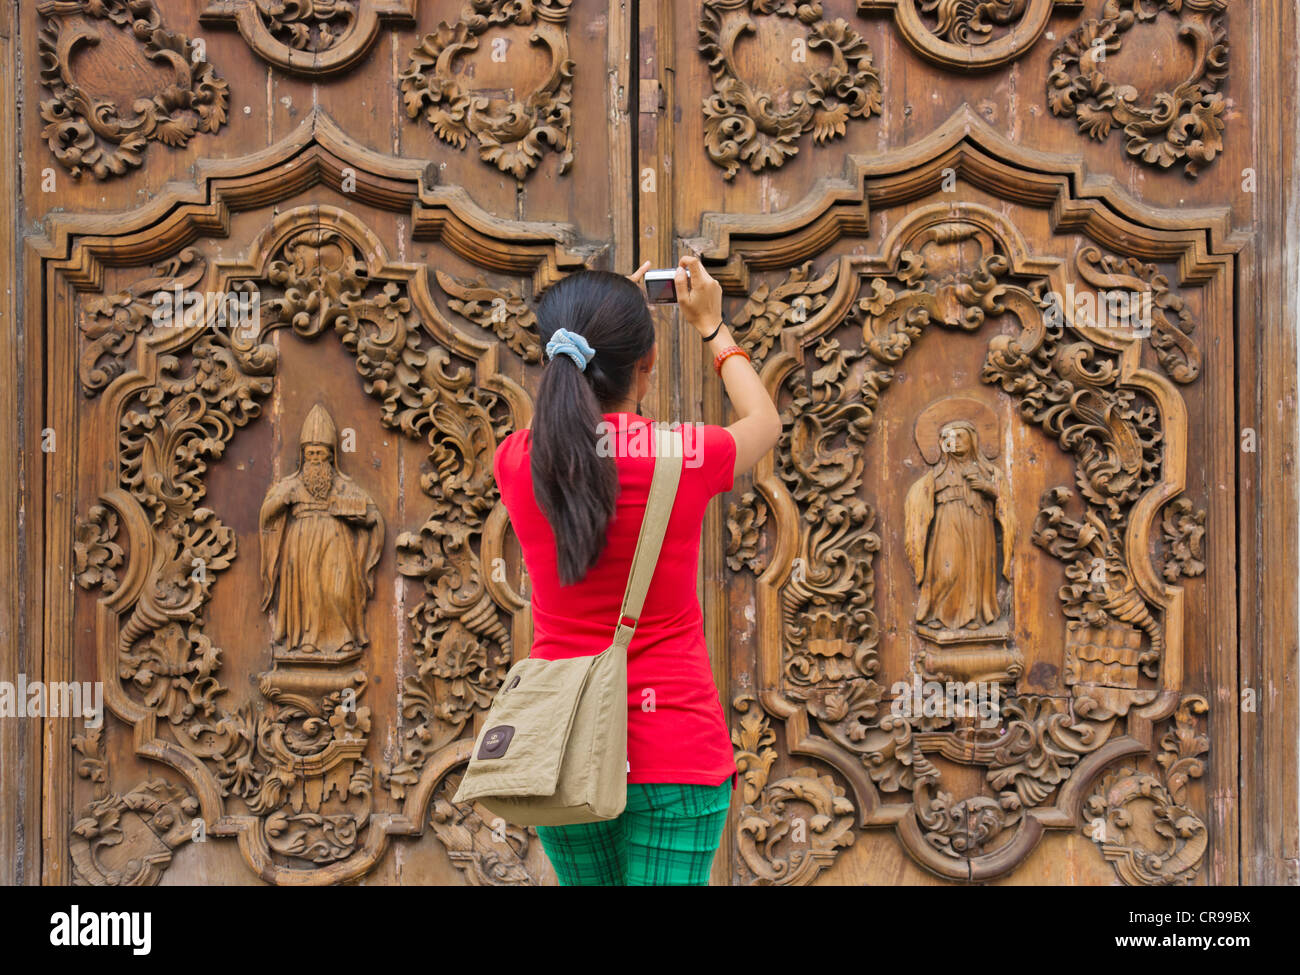 Tourist photographing the intricately carved wooden door at the entrance to Manila Metropolitan Cathedral, Manila, Philippines Stock Photo